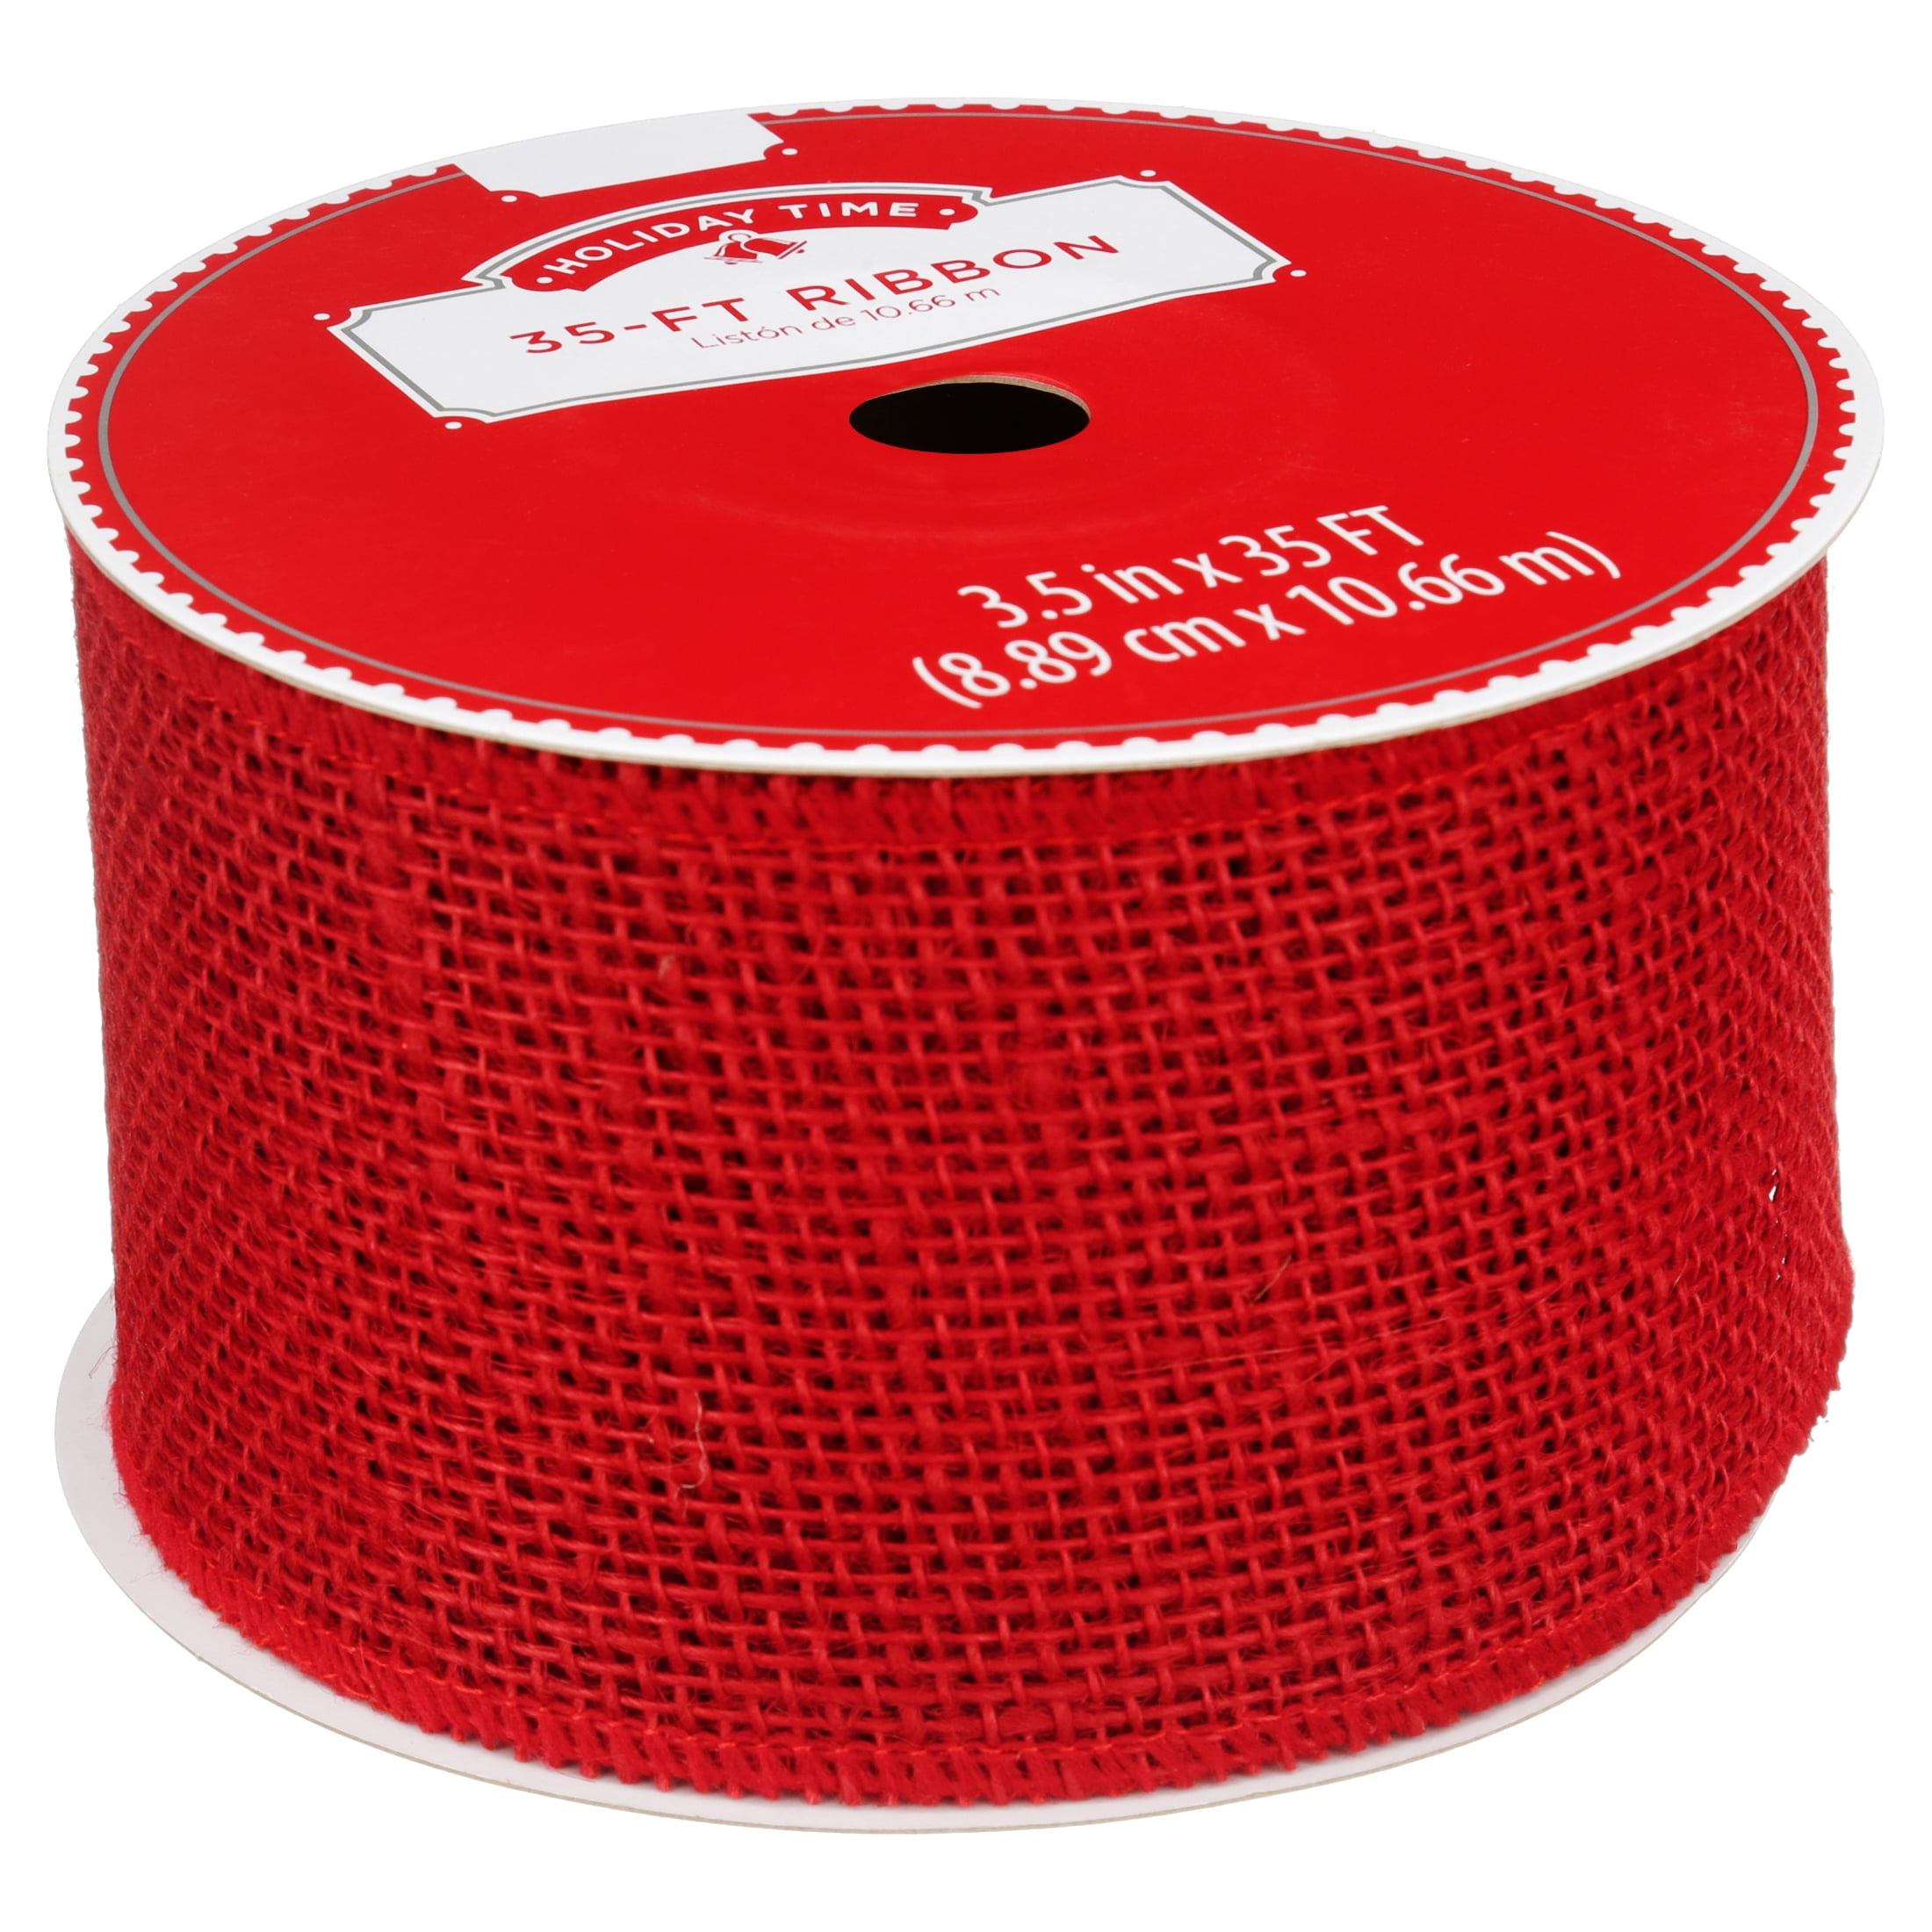 HOLIDAY TIME 35-FT RED BURLAP RIBBON 3.5 INCHES WIDE NEW